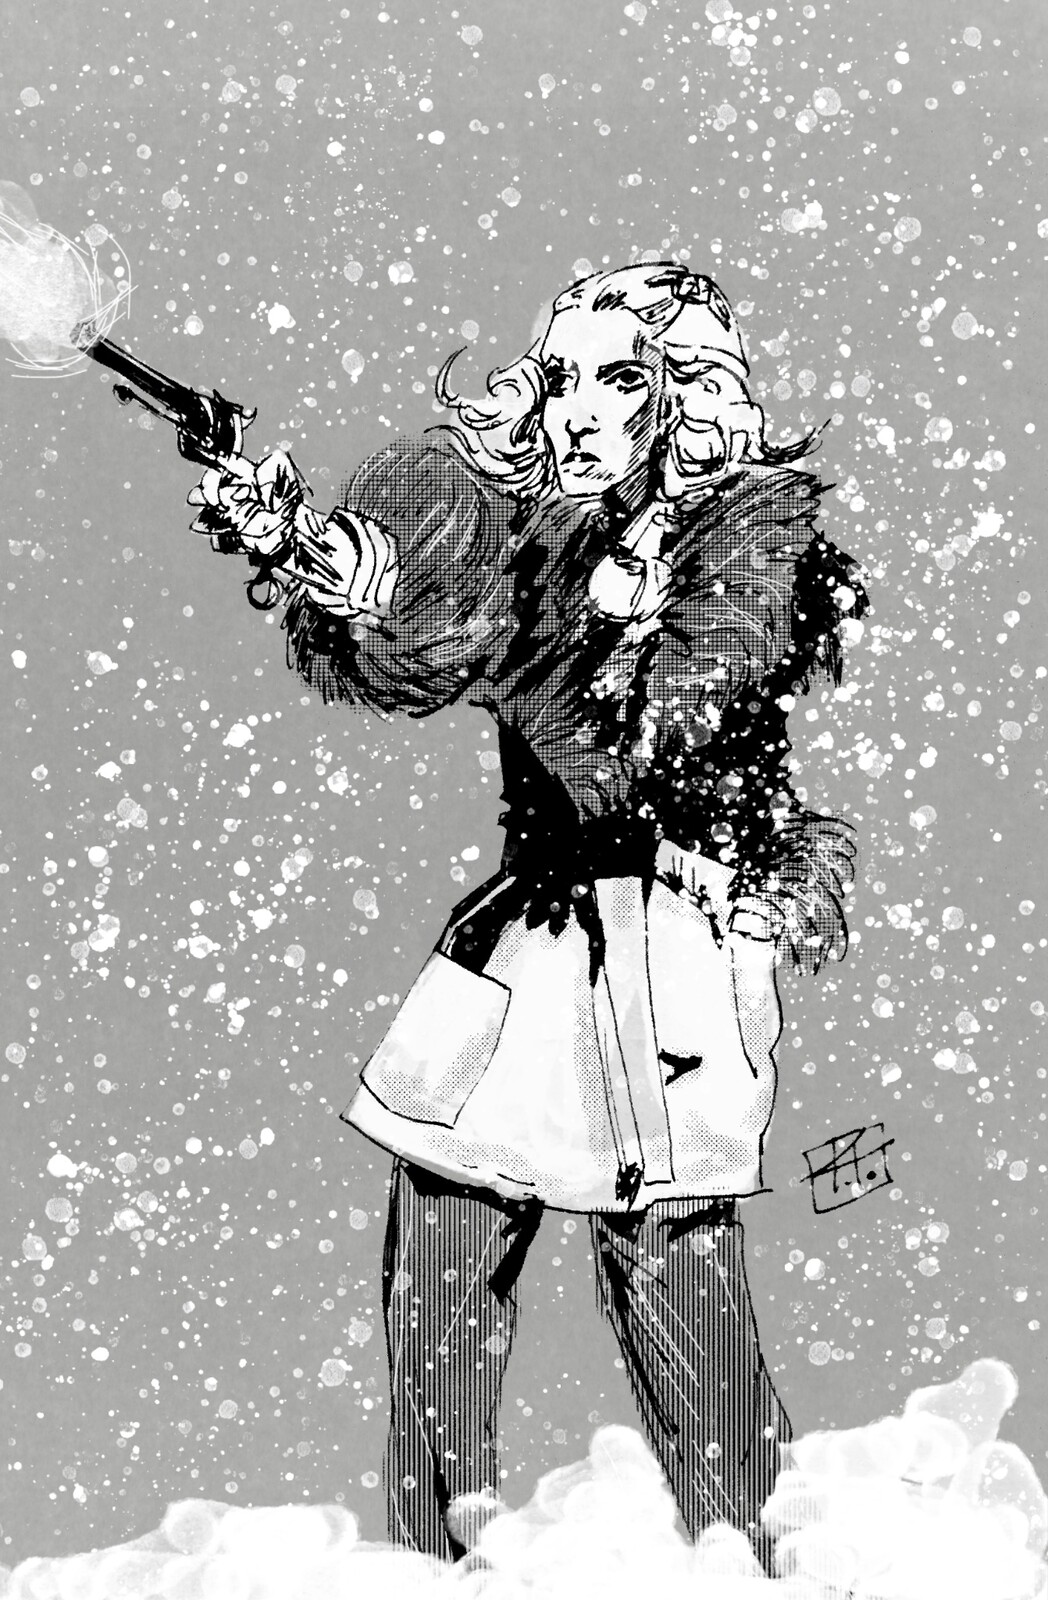 A Spy In The COld - Inks w/ Tones &amp; Opaque White